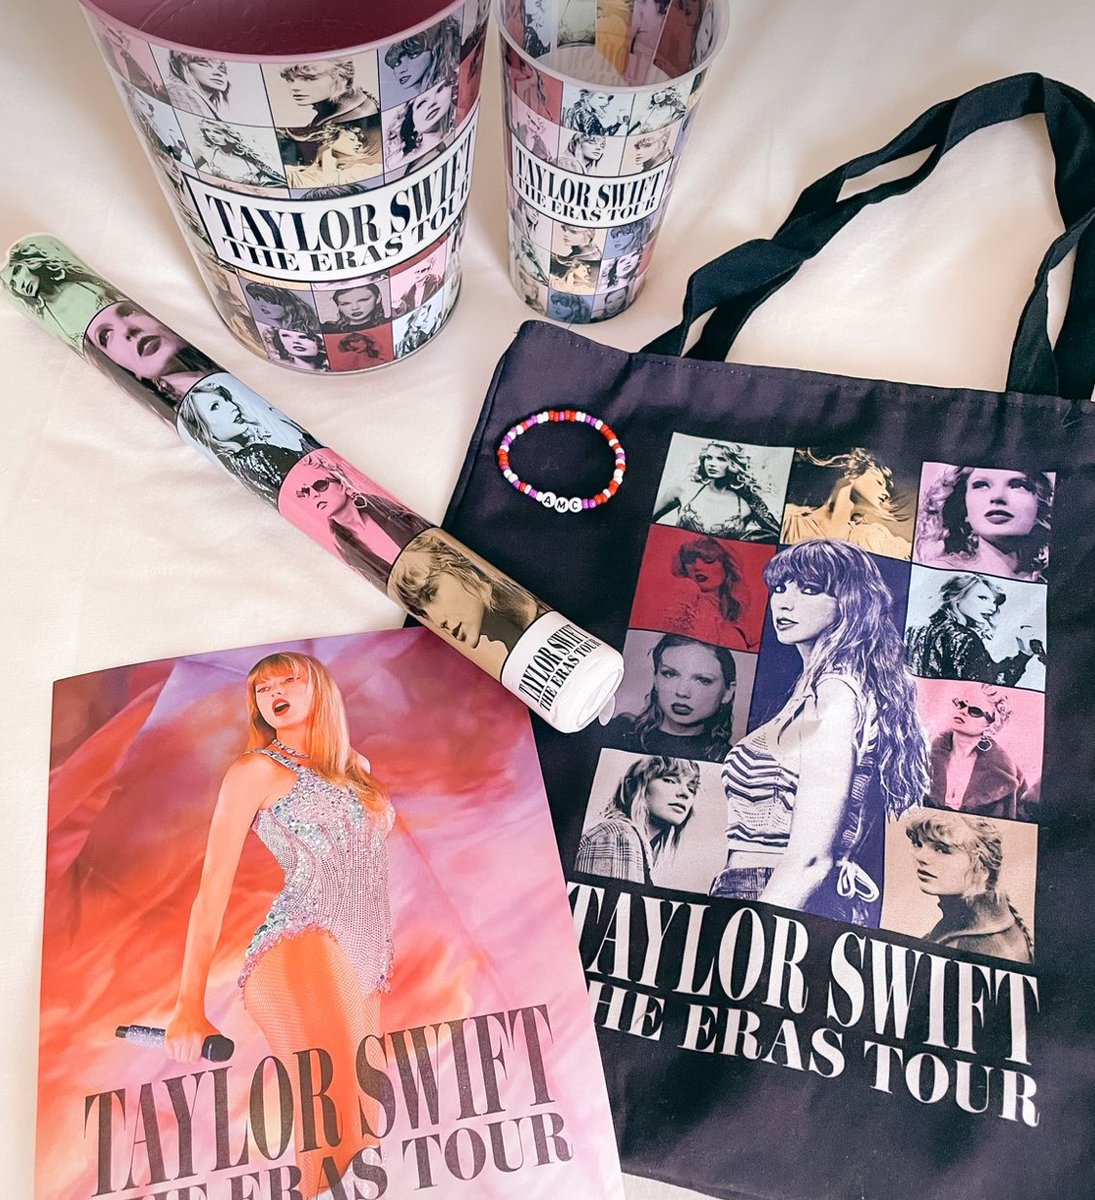 HEY!!! Want to enter this giveaway? All you have to do is like follow and repost last thing comment your fav TS song YOU GET : ttpd earrings ERAS tour tote bag!